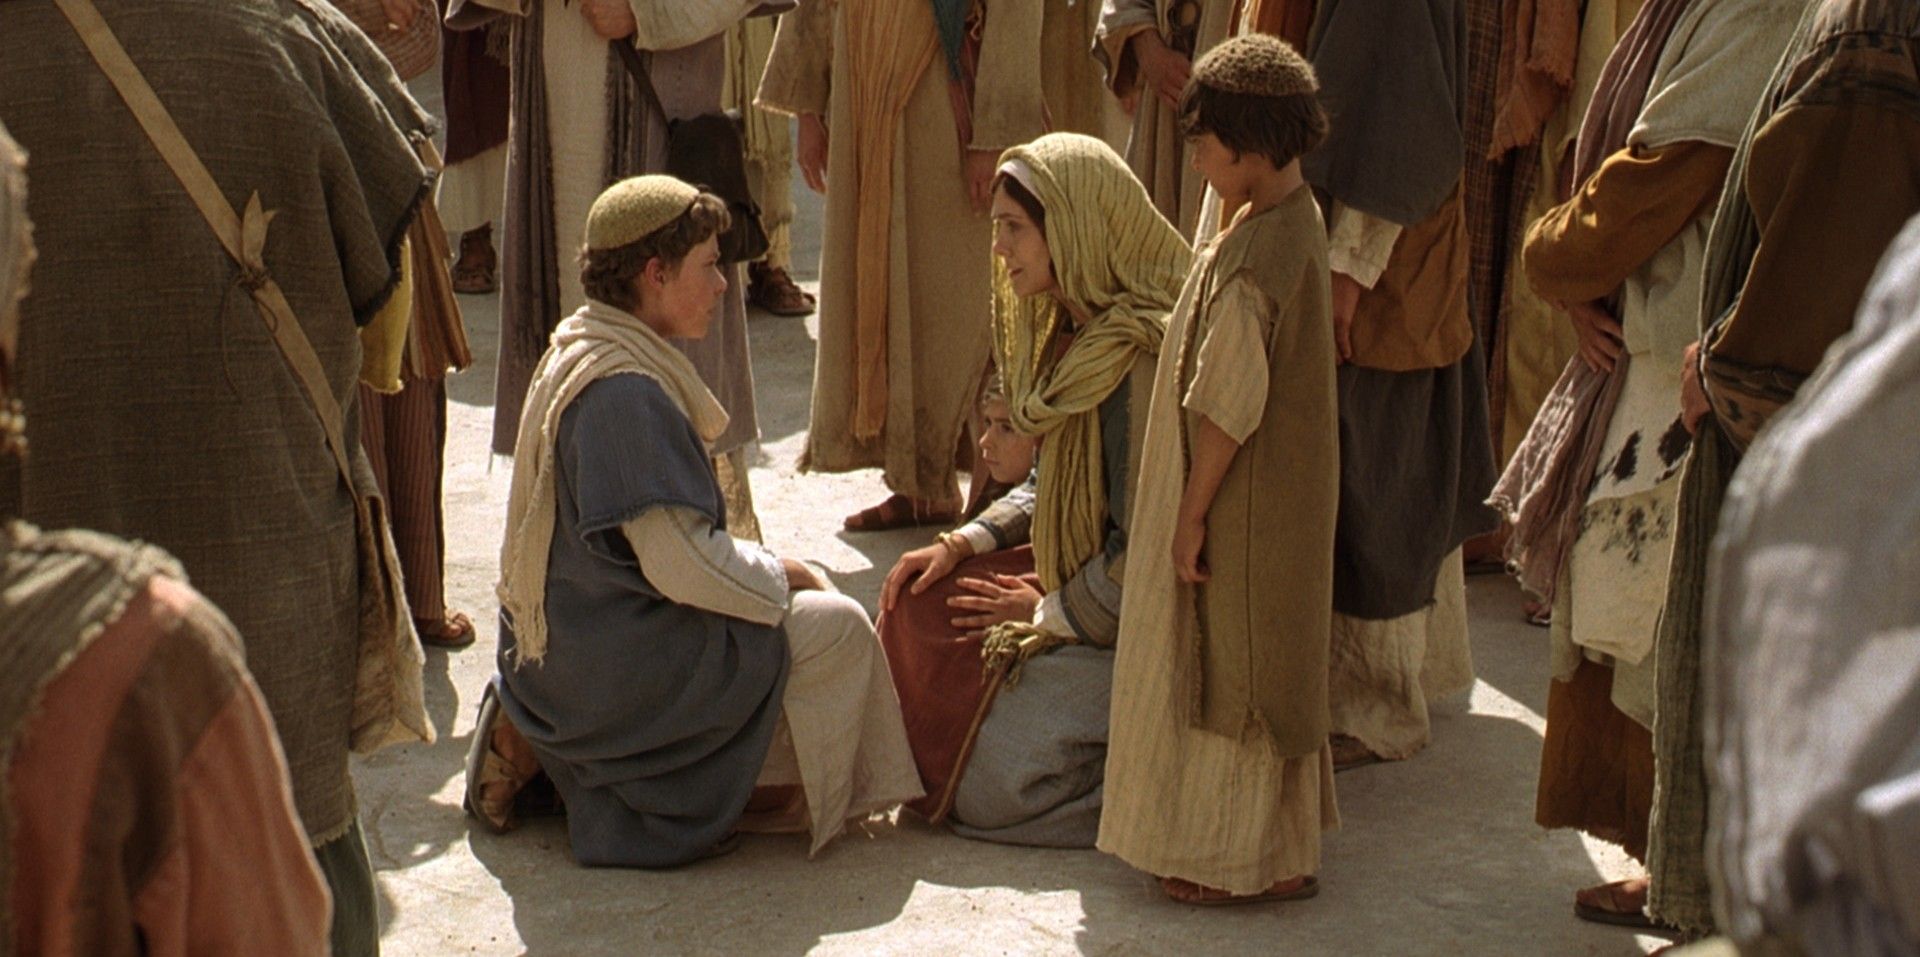 Jesus says to His mother, Mary, "Wist ye not that I must be about my Father's business?"